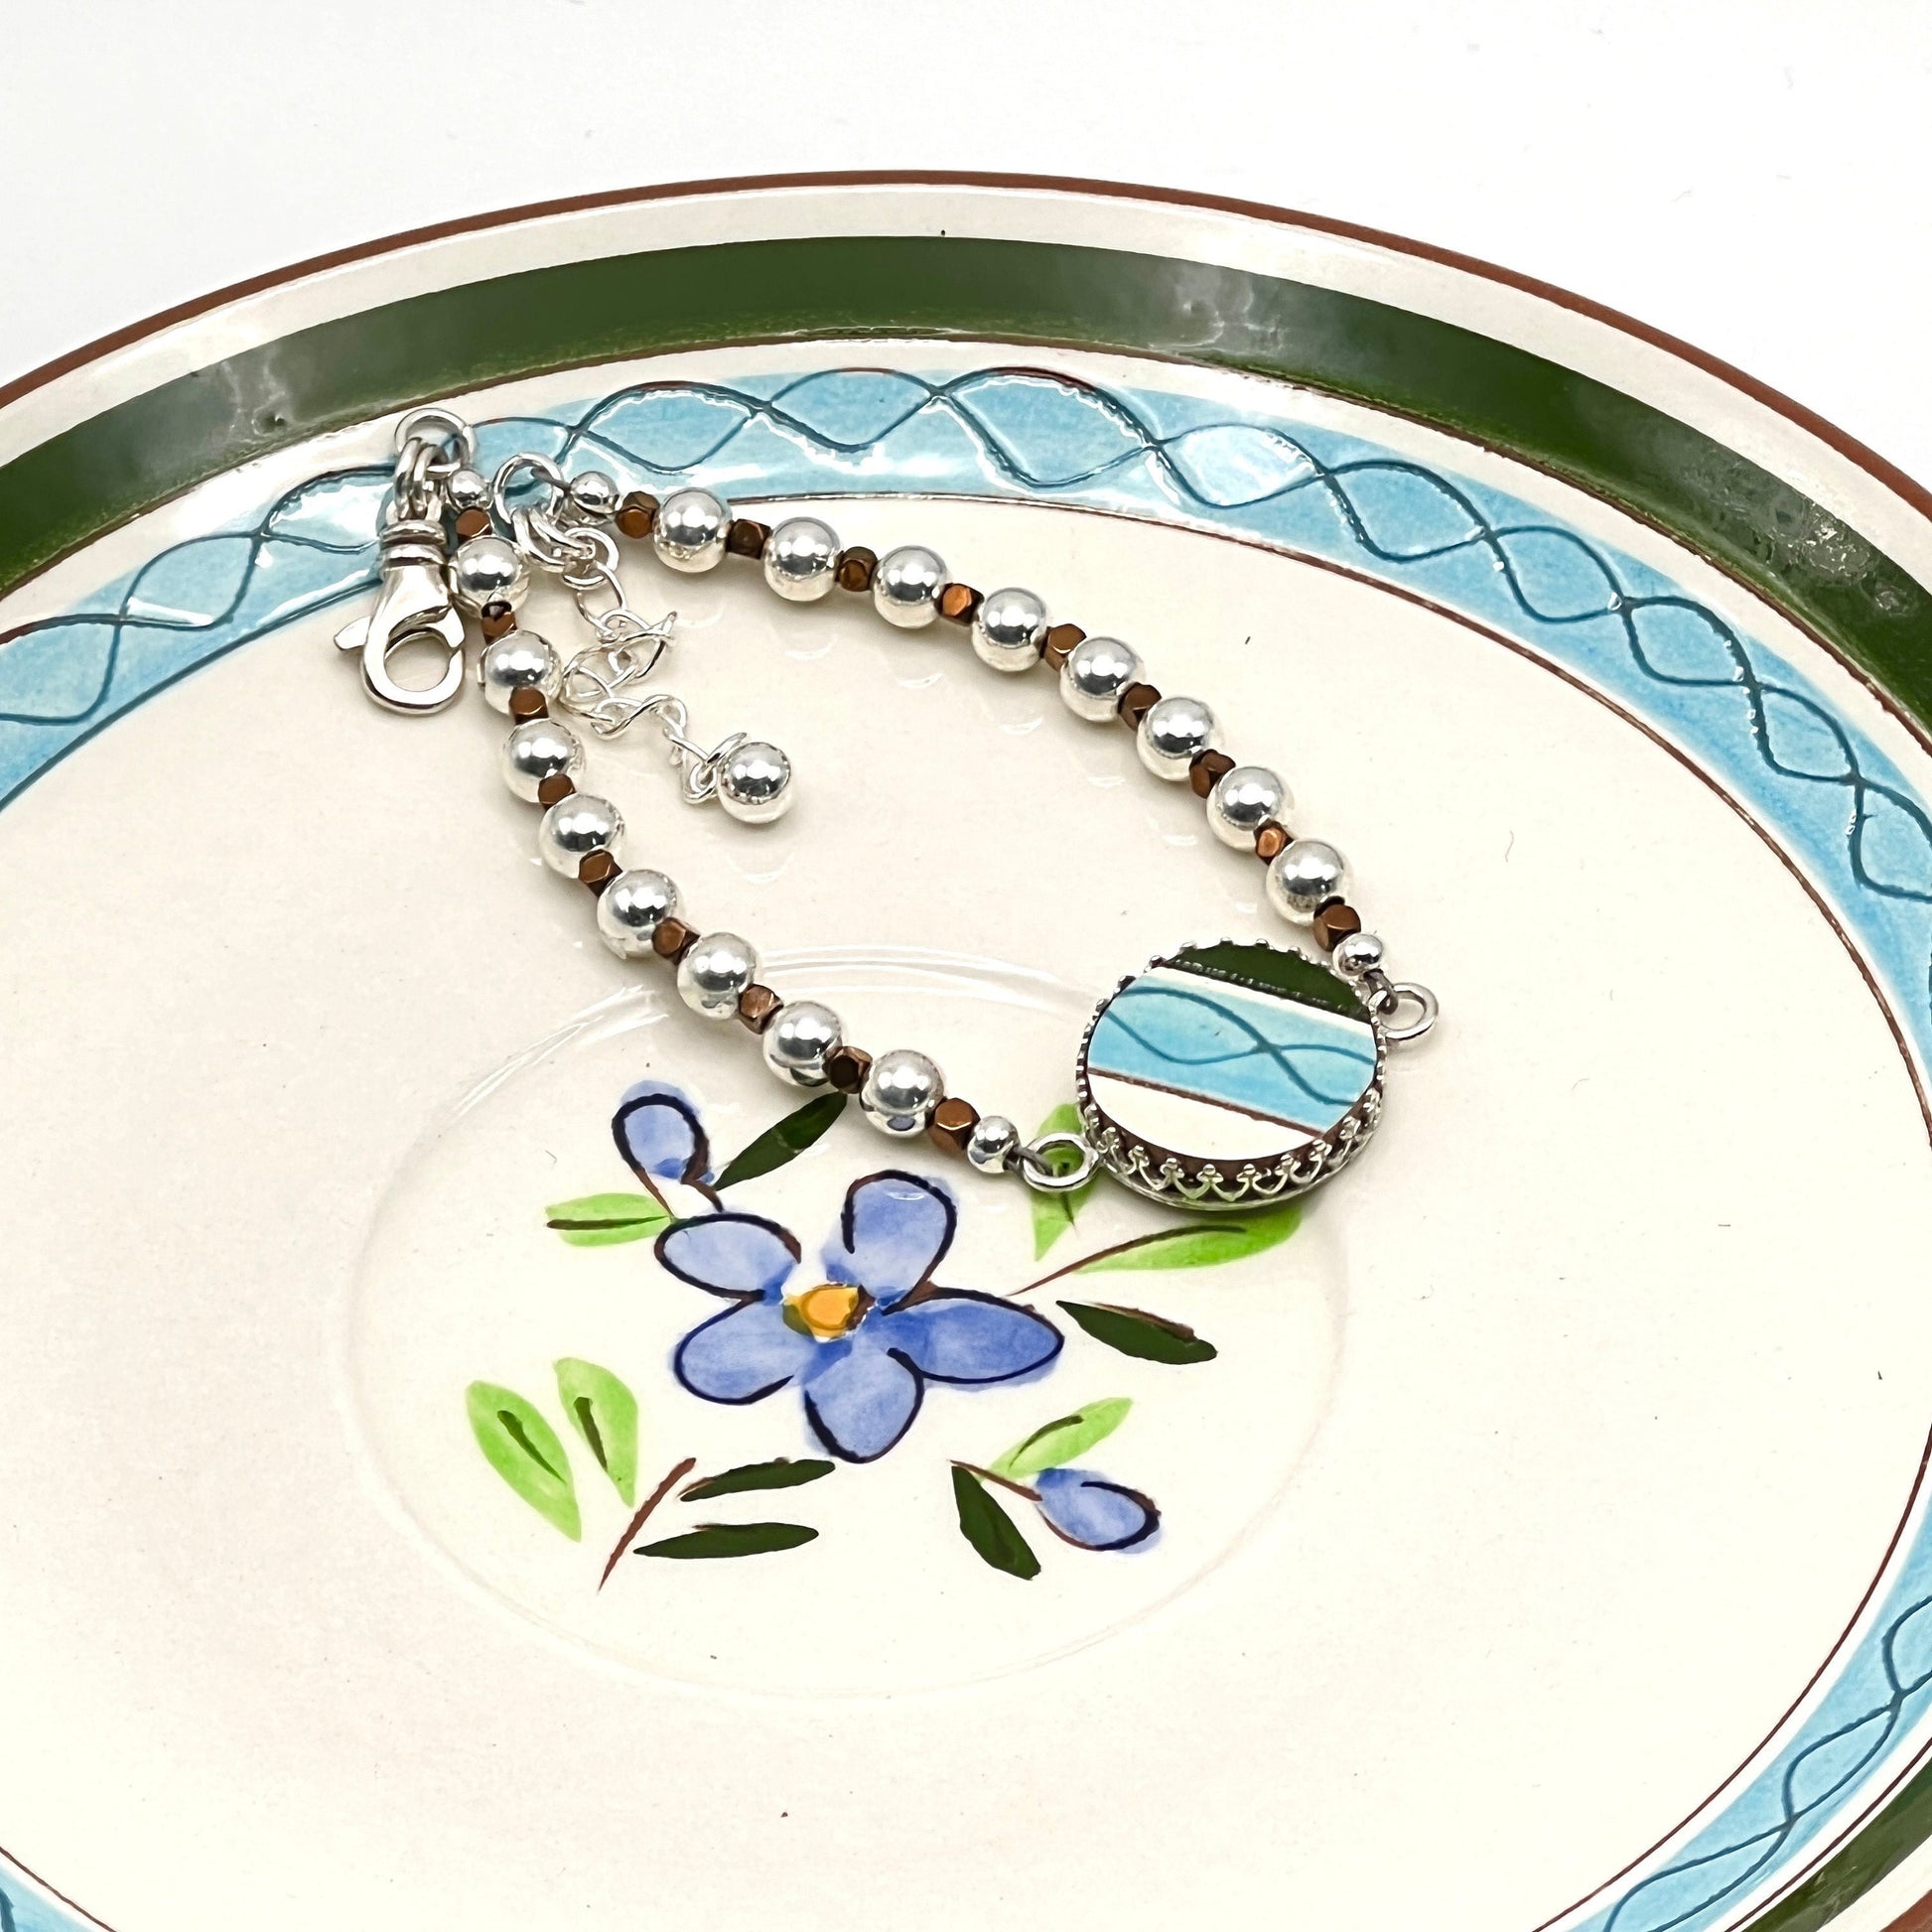 Adjustable Stangl Pottery Bracelet, 9th Anniversary Gift, Gift for Wife, Broken China Jewelry